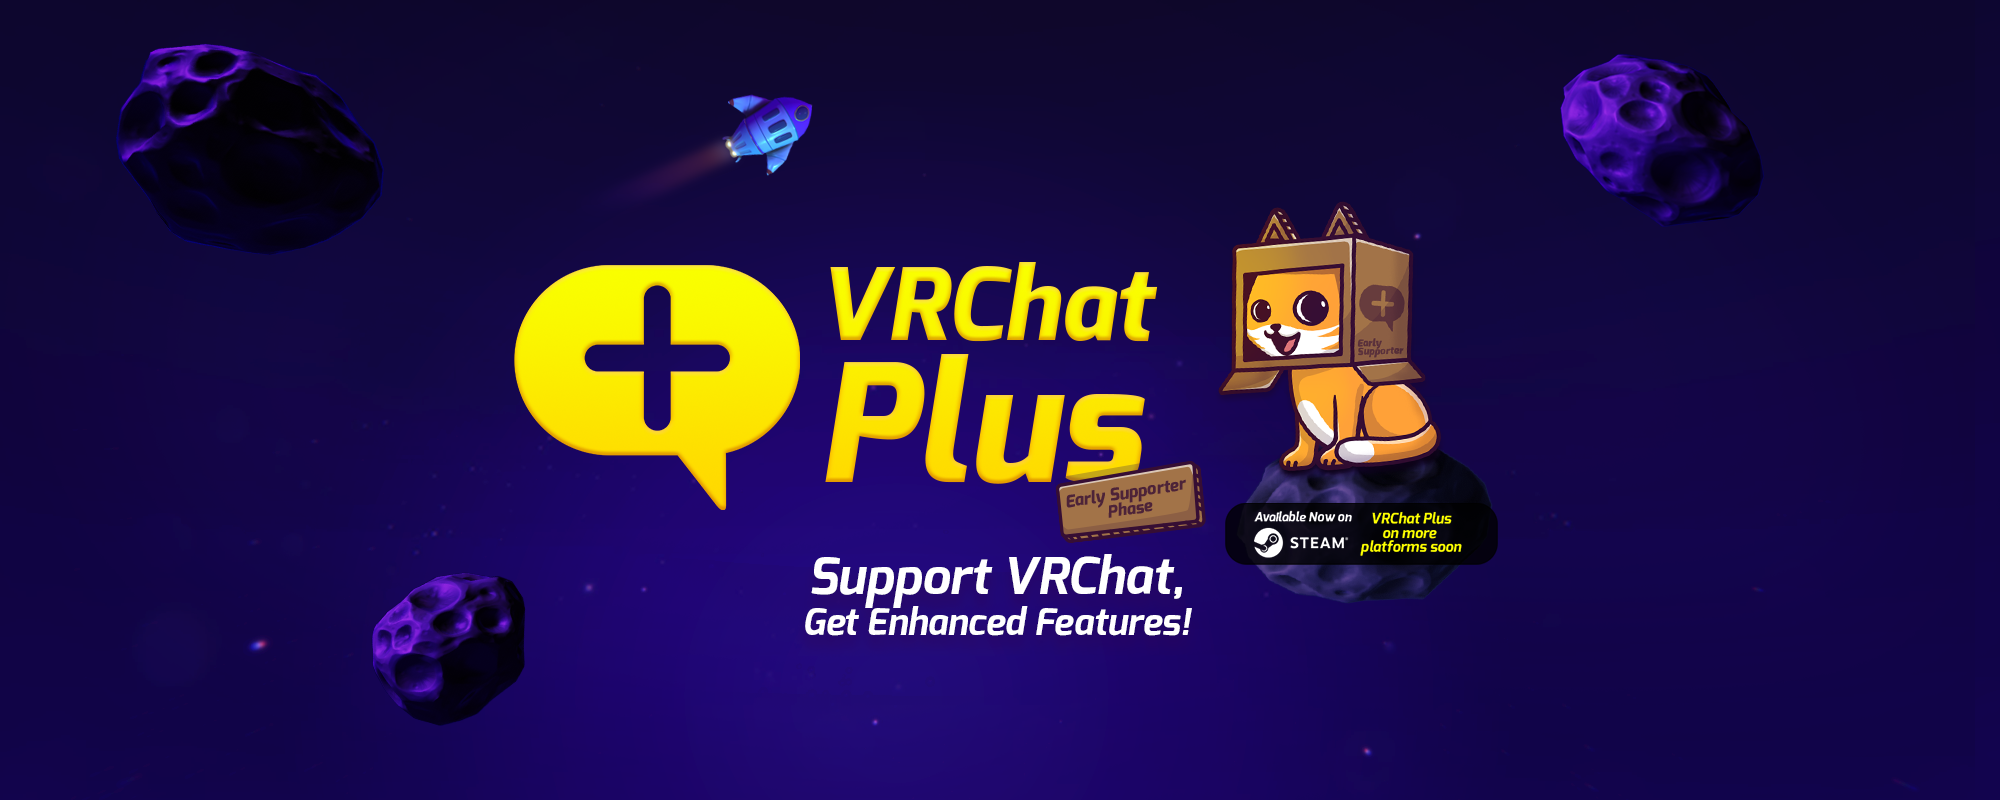 ‘vrchat Launches Paid Subscription Service With Premium Features